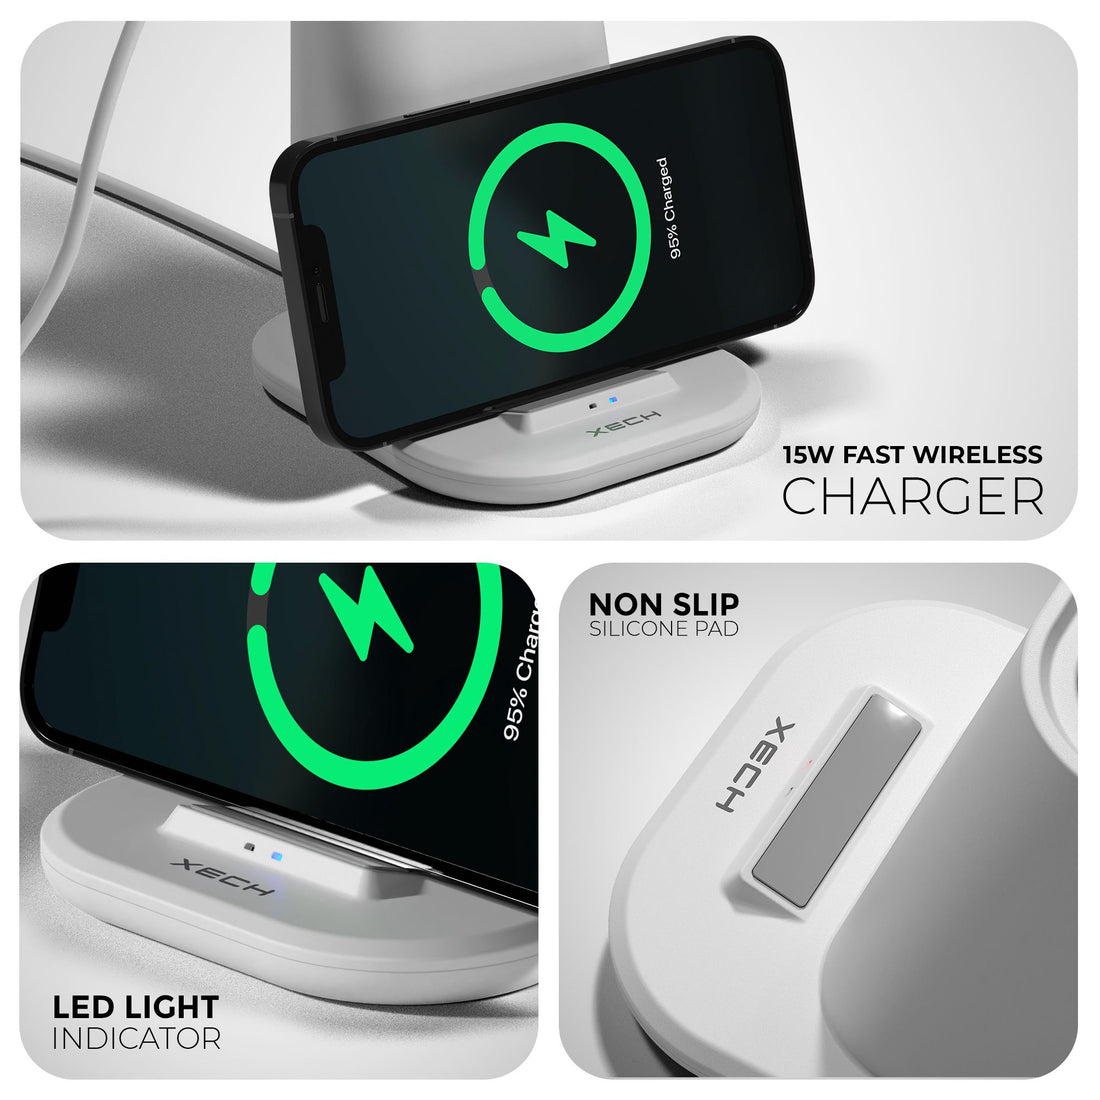 Personalized Multifunctional Table Lamp with Wireless Charger, USB ports, and Stationery Holder - for Promotions, Giveaway, Event Freebies, Corporate Gifting, Personal Gifting, Festival Gifting